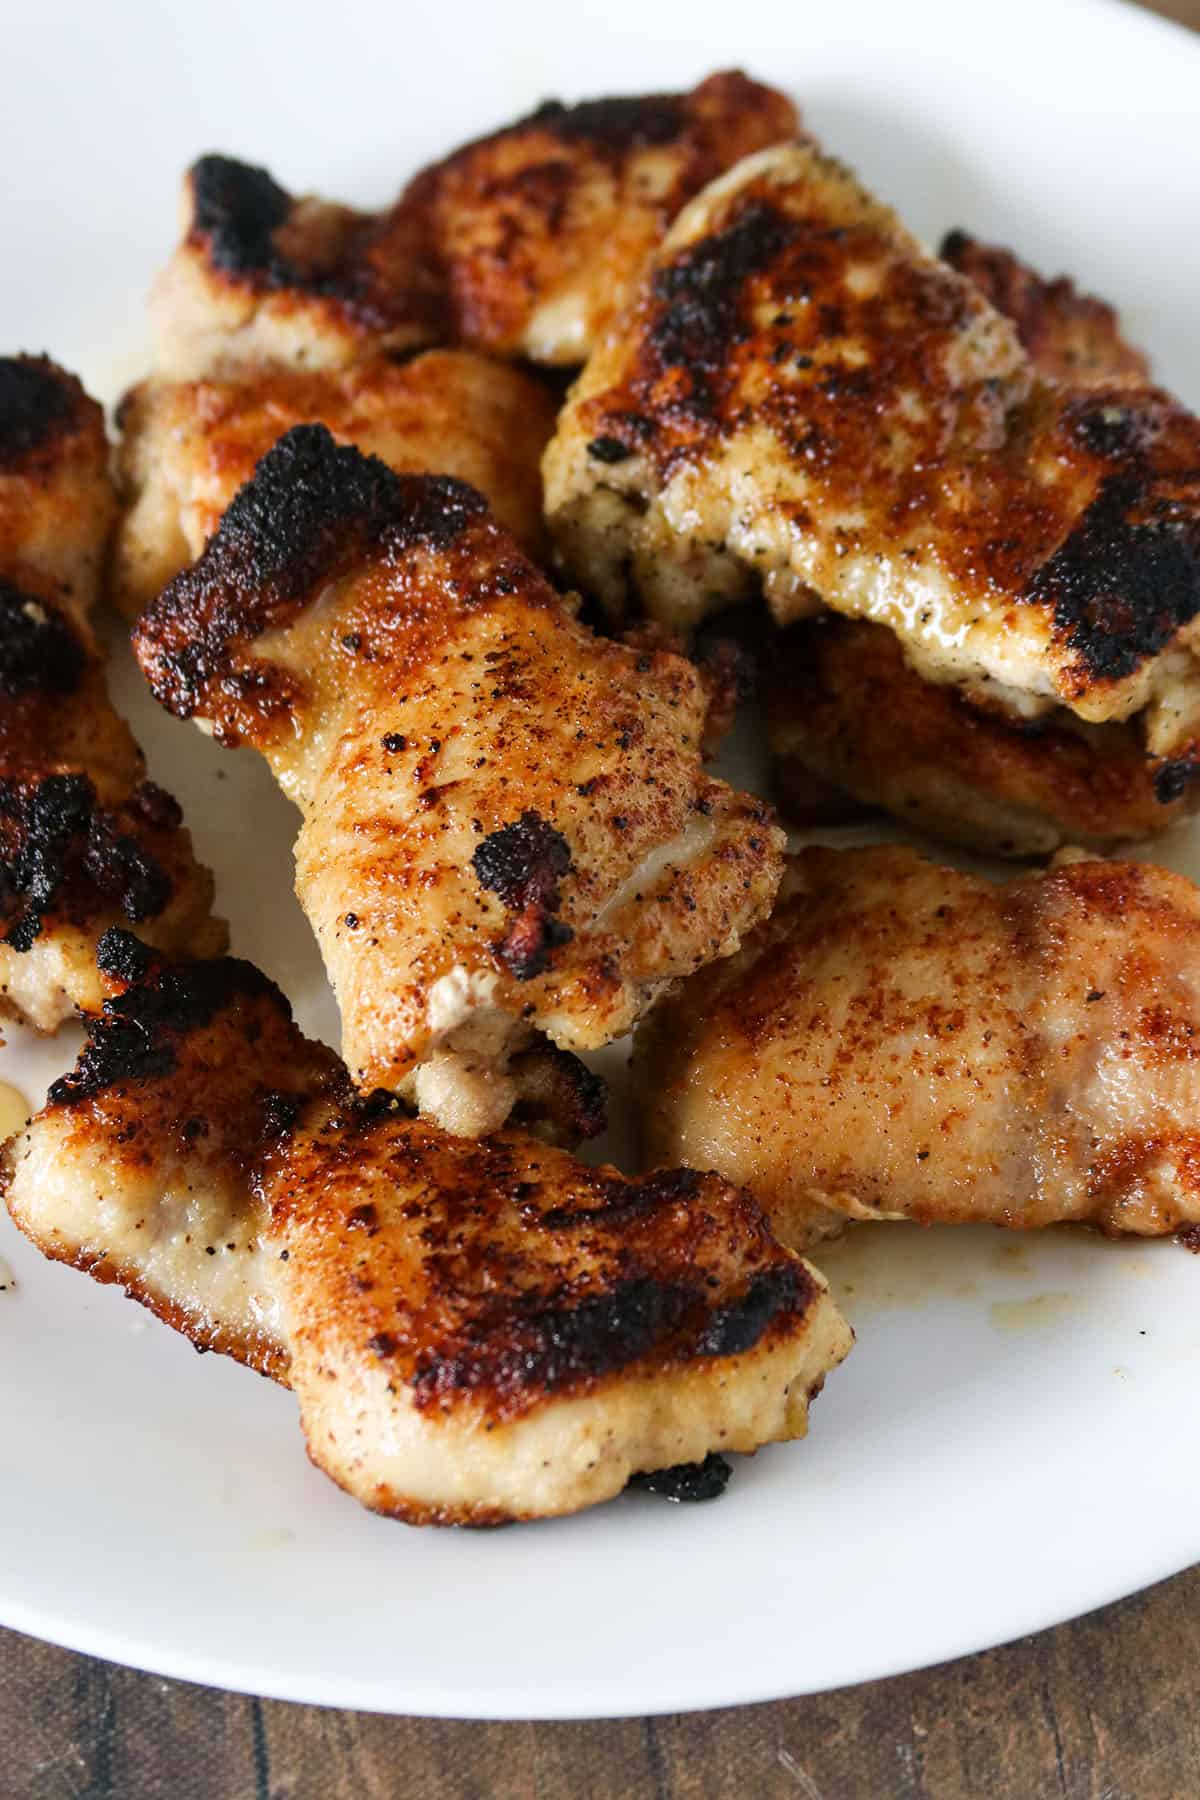 The cooked chicken thighs on a plate.